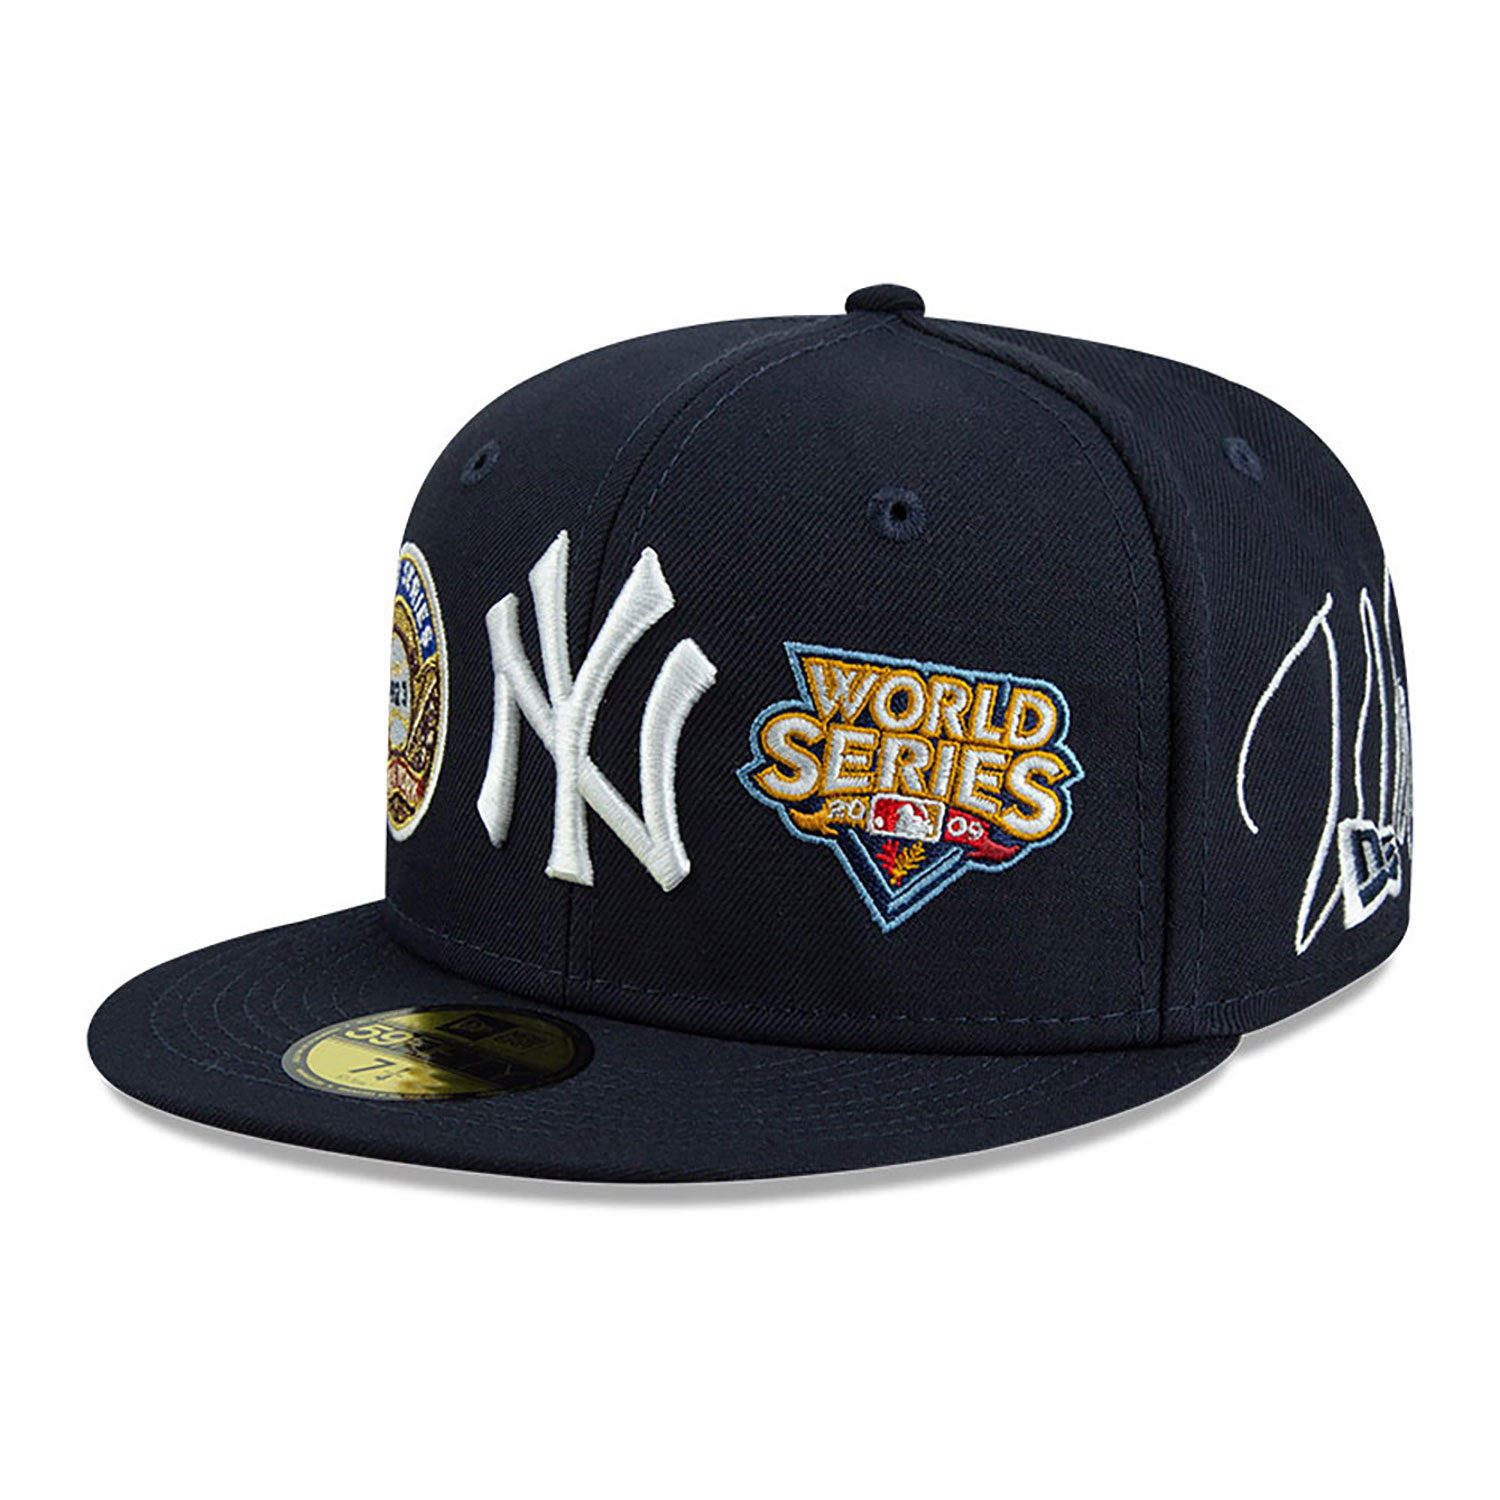 New York Yankees New Era Concepts Champions 59FITY Fitted Hat